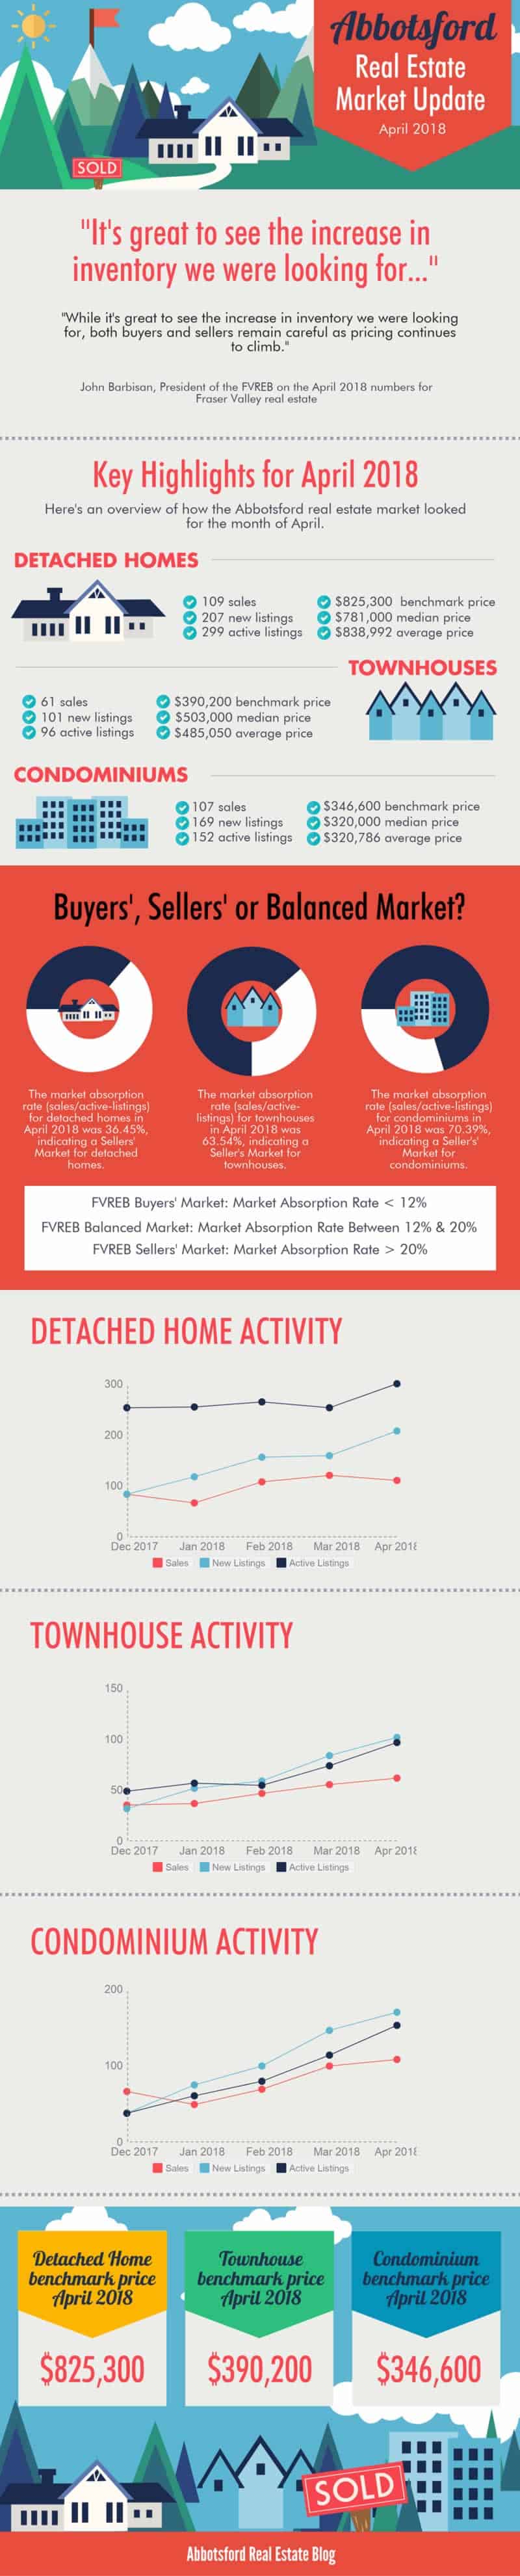 Abbotsford Townhouse Market Update April 2018 Infographic